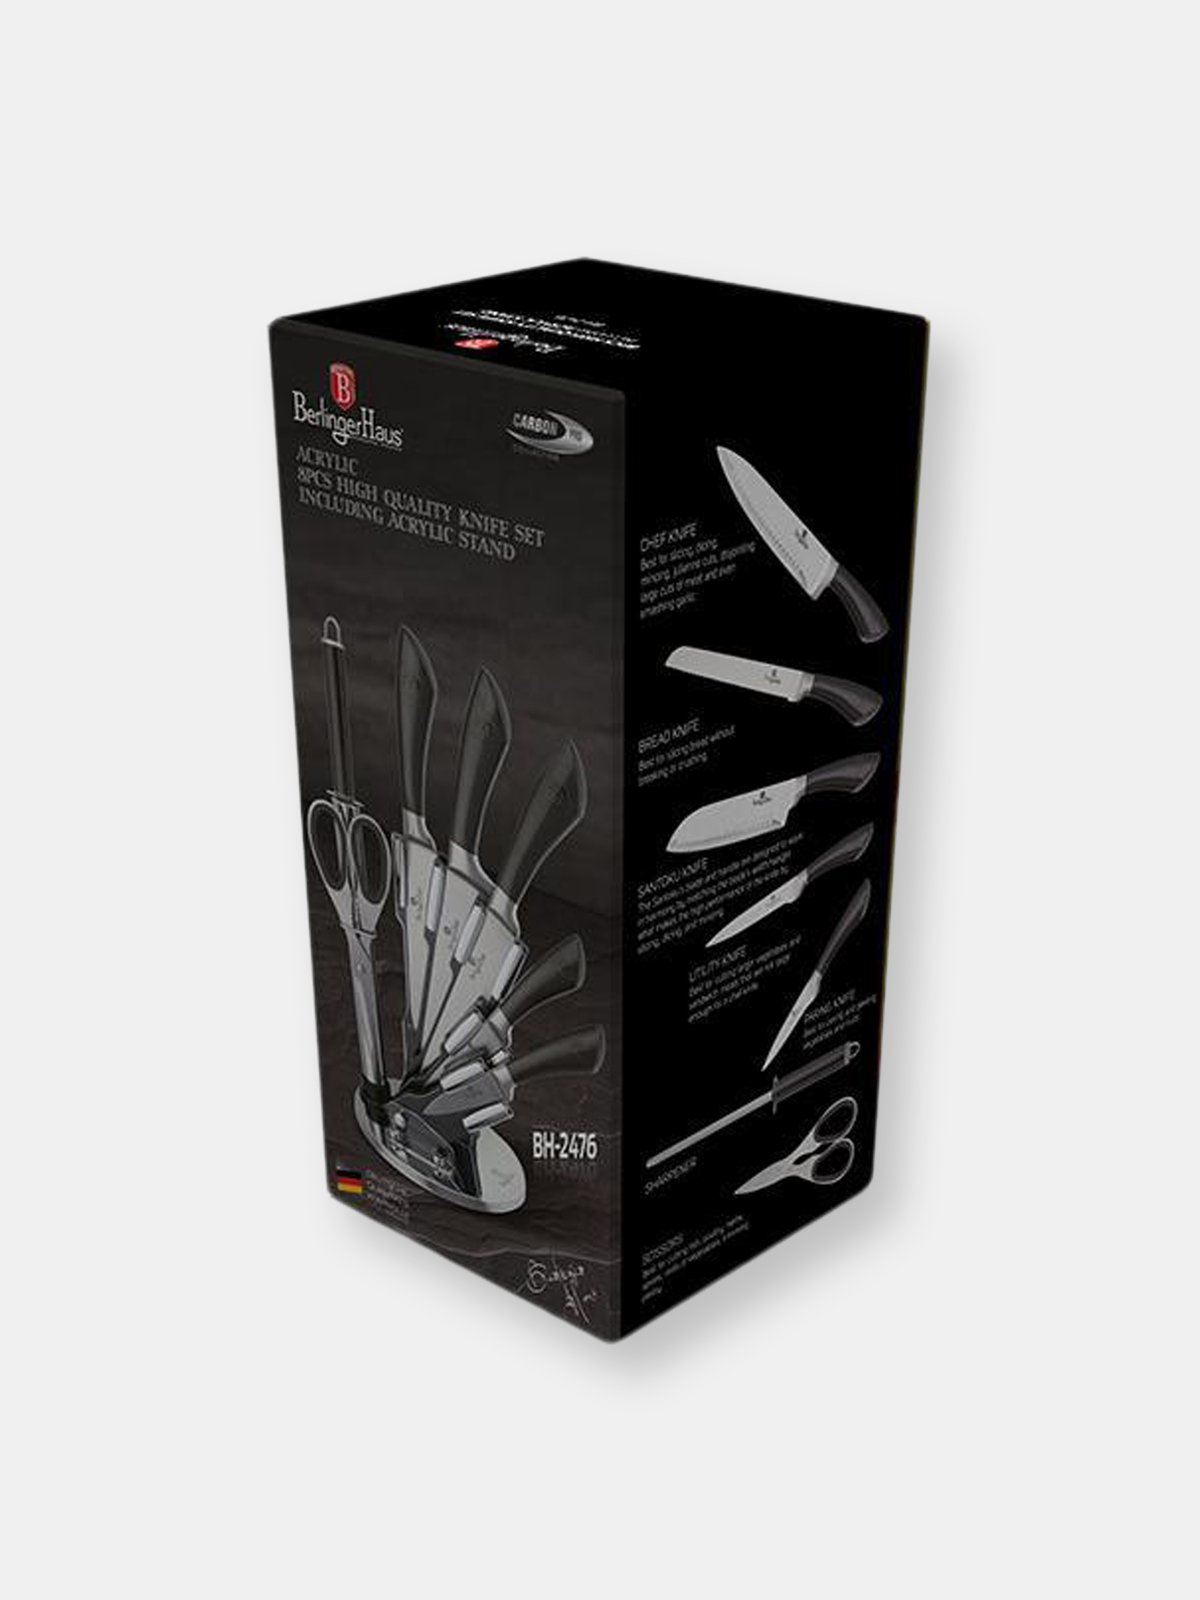 https://images.verishop.com/berlinger-haus-berlinger-haus-8-piece-knife-set-with-acrylic-stand-black-rose-gold-collection/M05999108425080-3513243979?auto=format&cs=strip&fit=max&w=1200